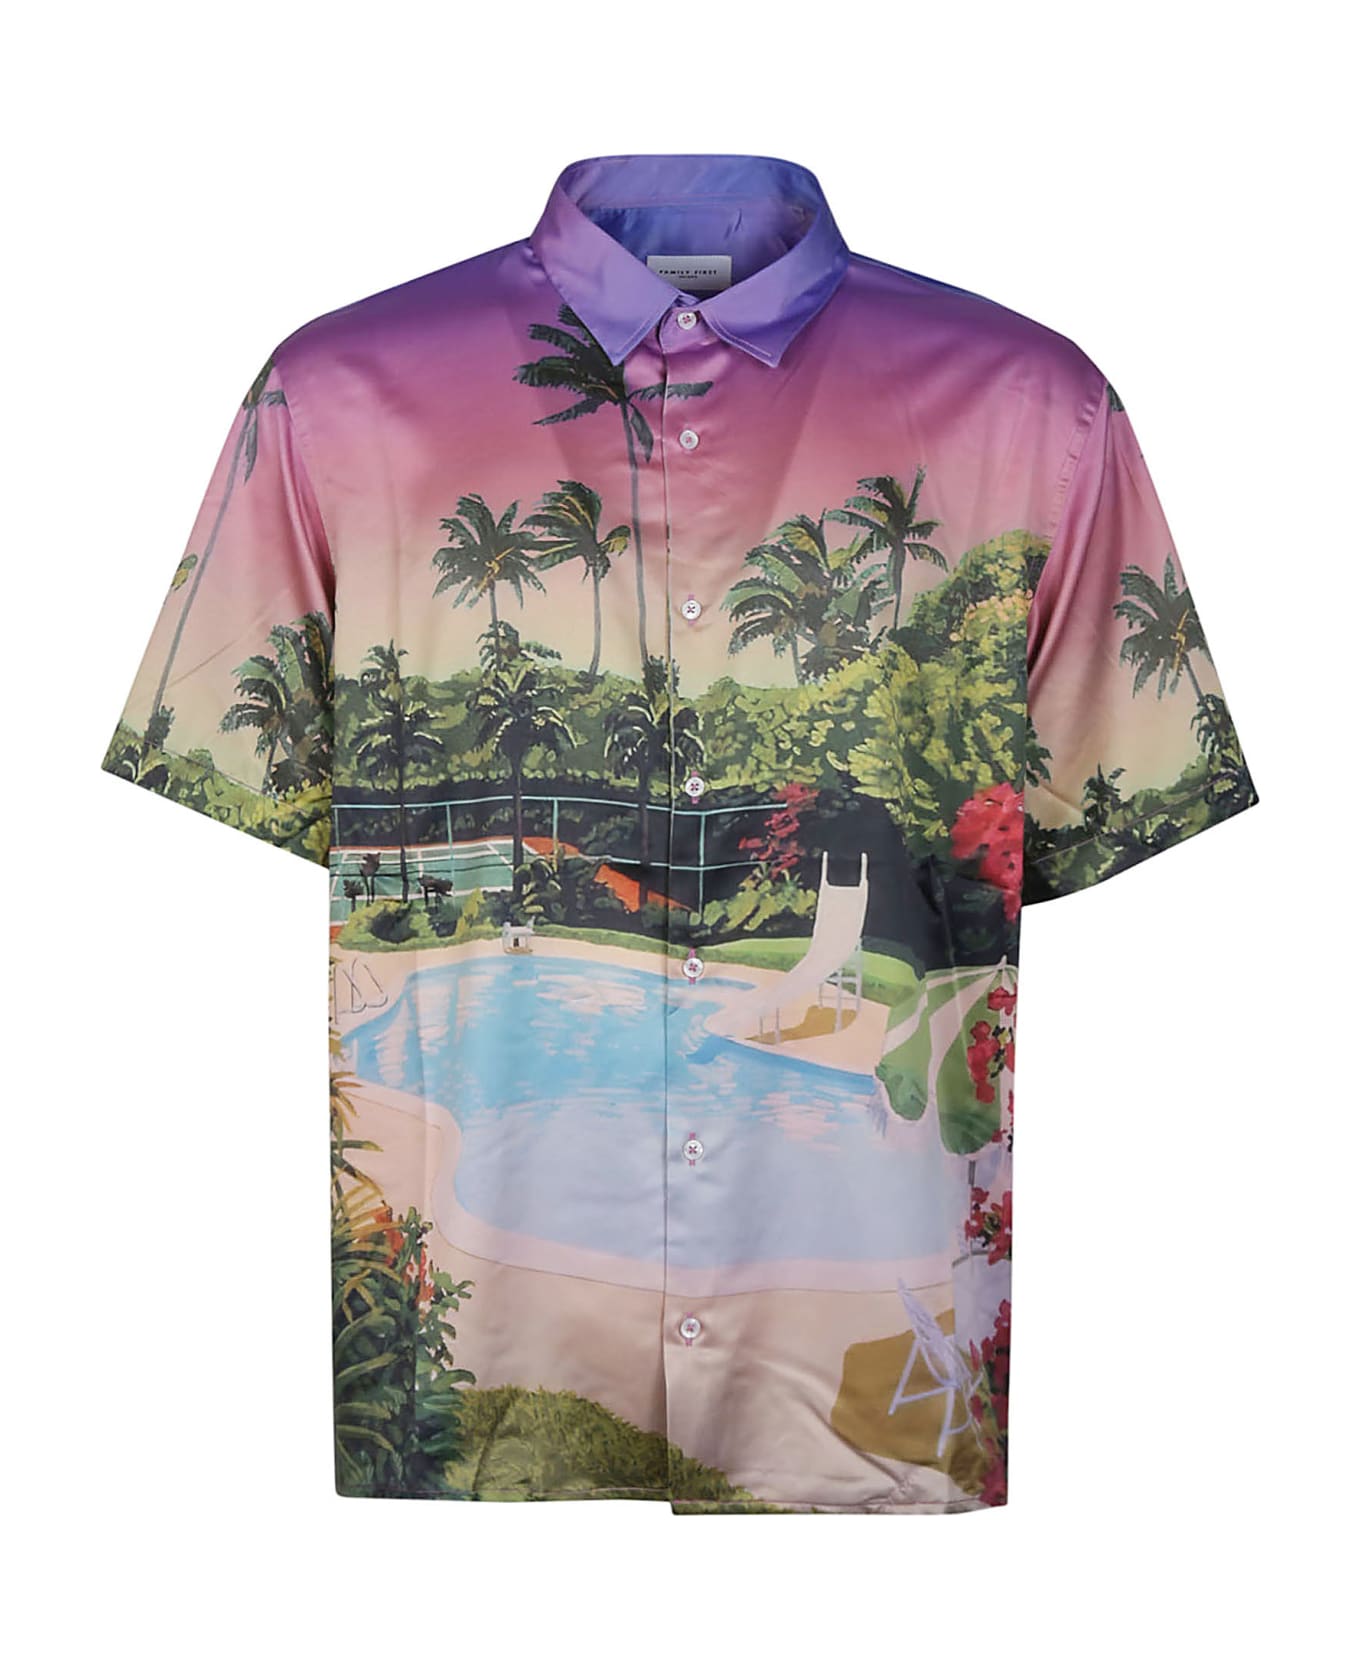 Family First Milano Short Sleeve Sunset Shirt - Multicolor